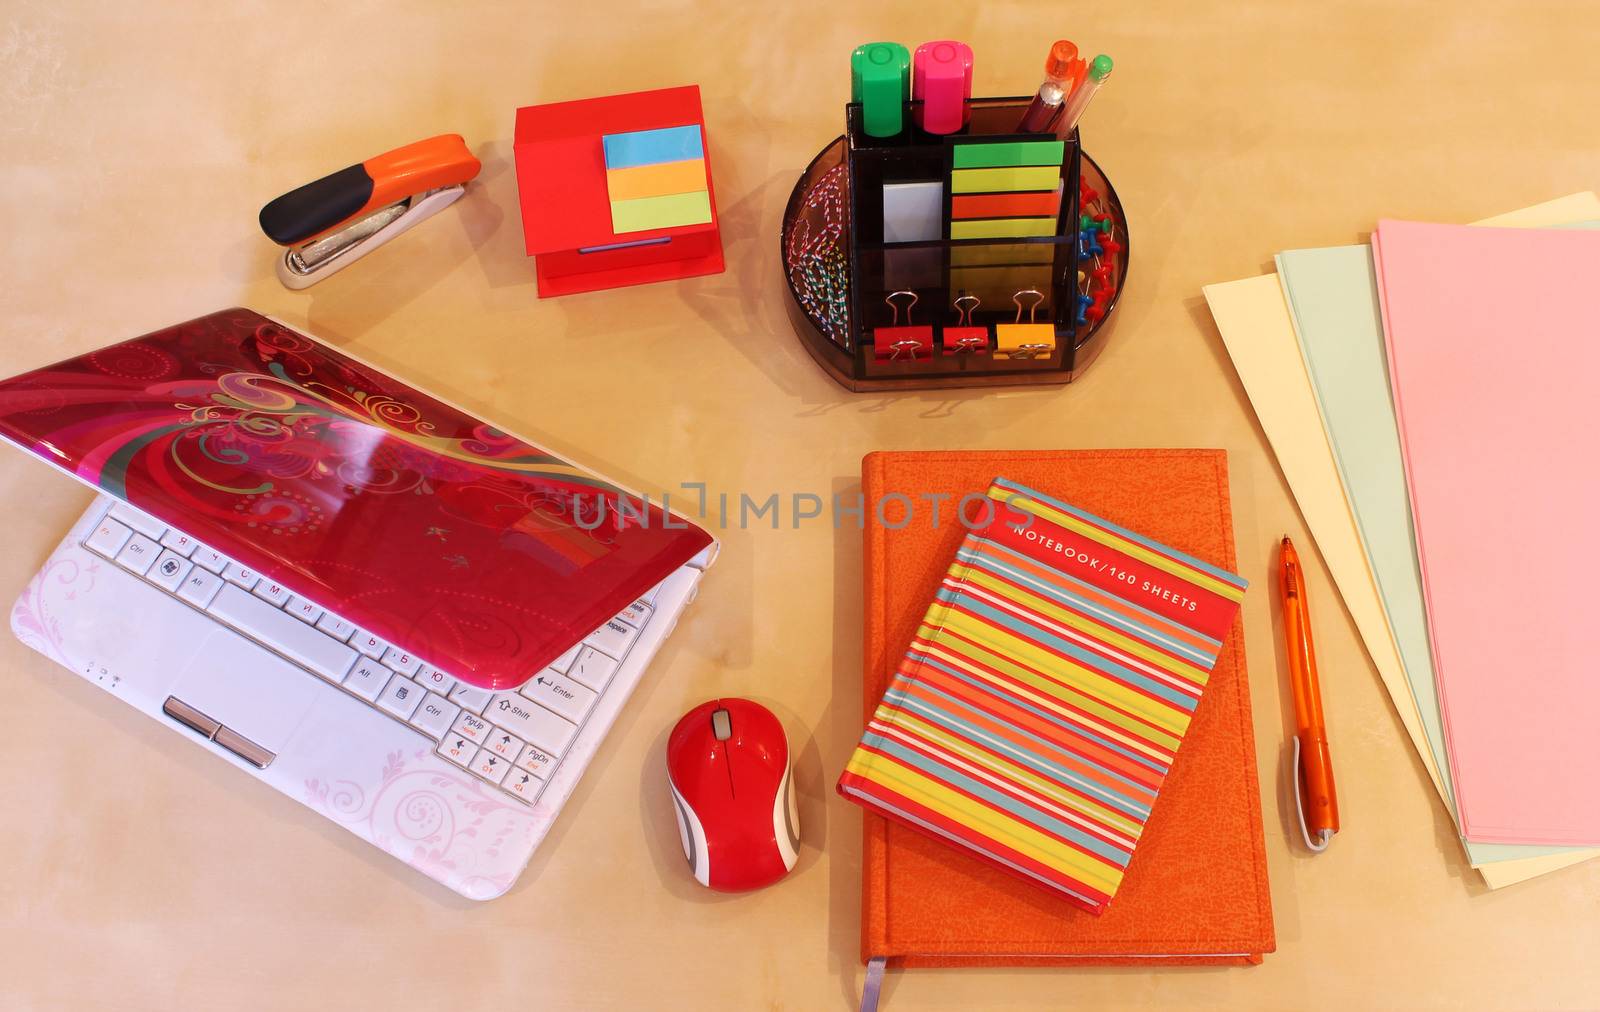 Computer painted on the cover, orange daily planner and colorful stationery